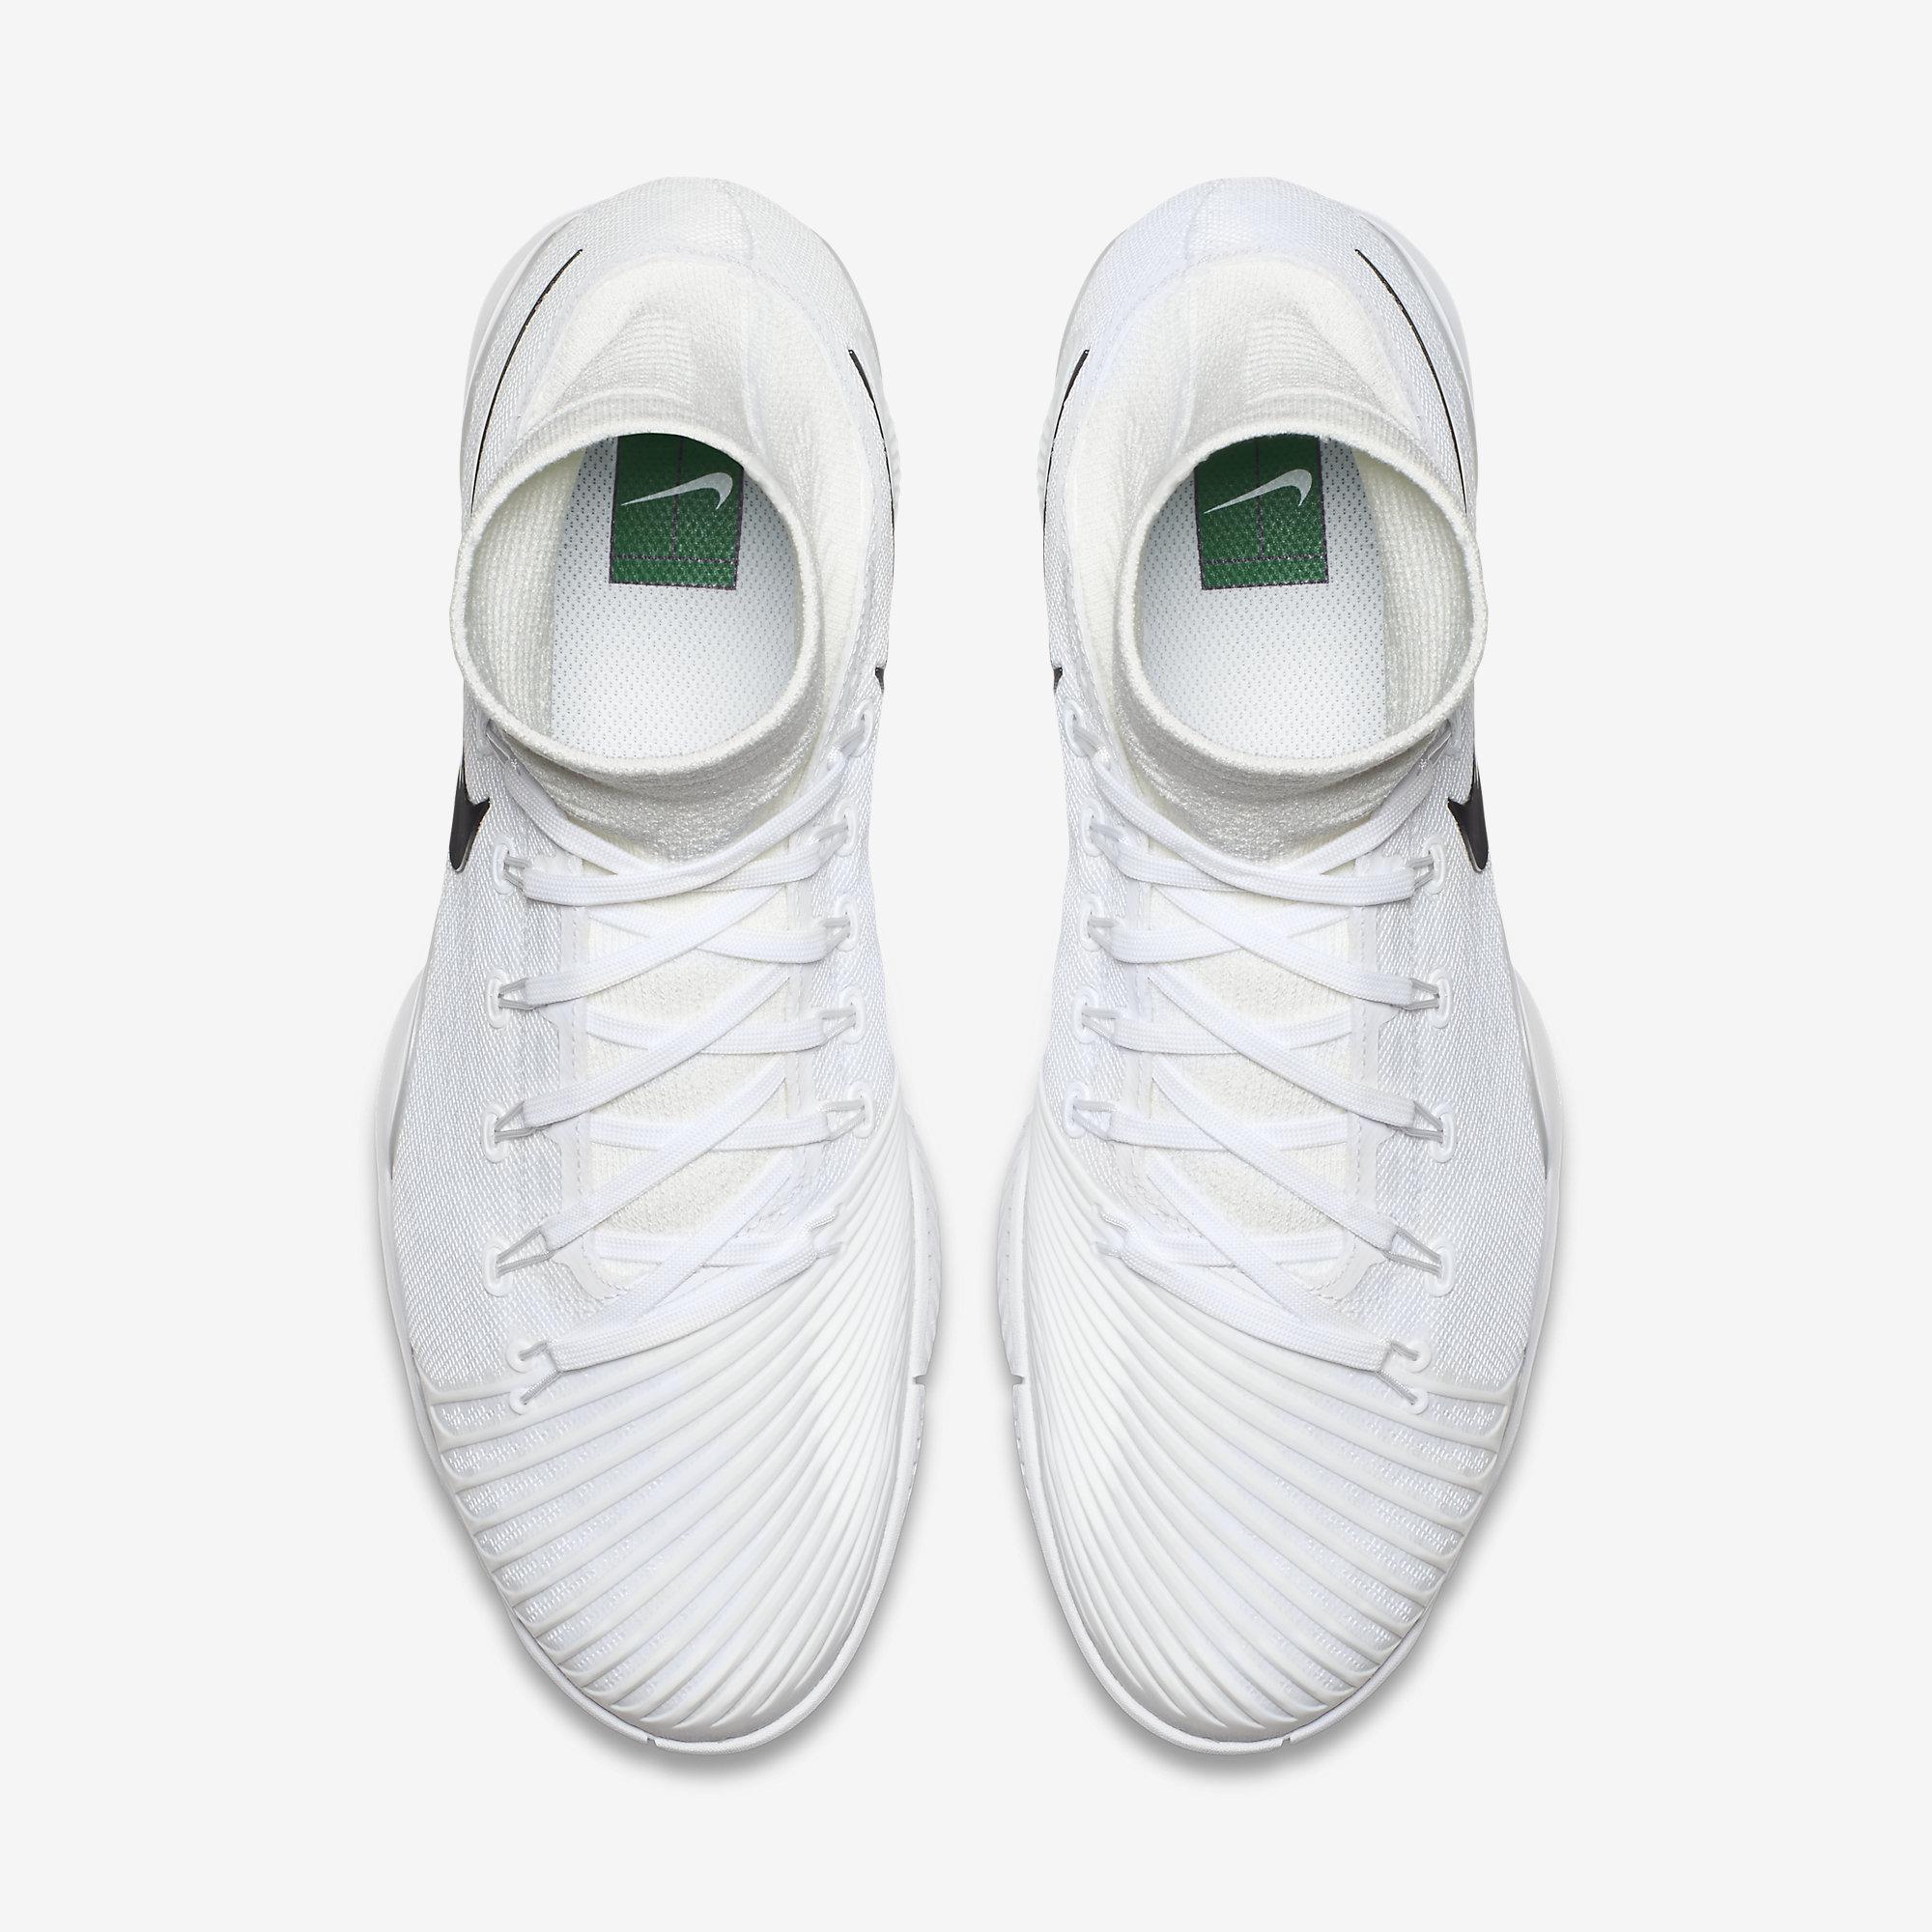 Nike Mens Air Zoom Ultrafly Limited Edition Tennis Shoes - White ...